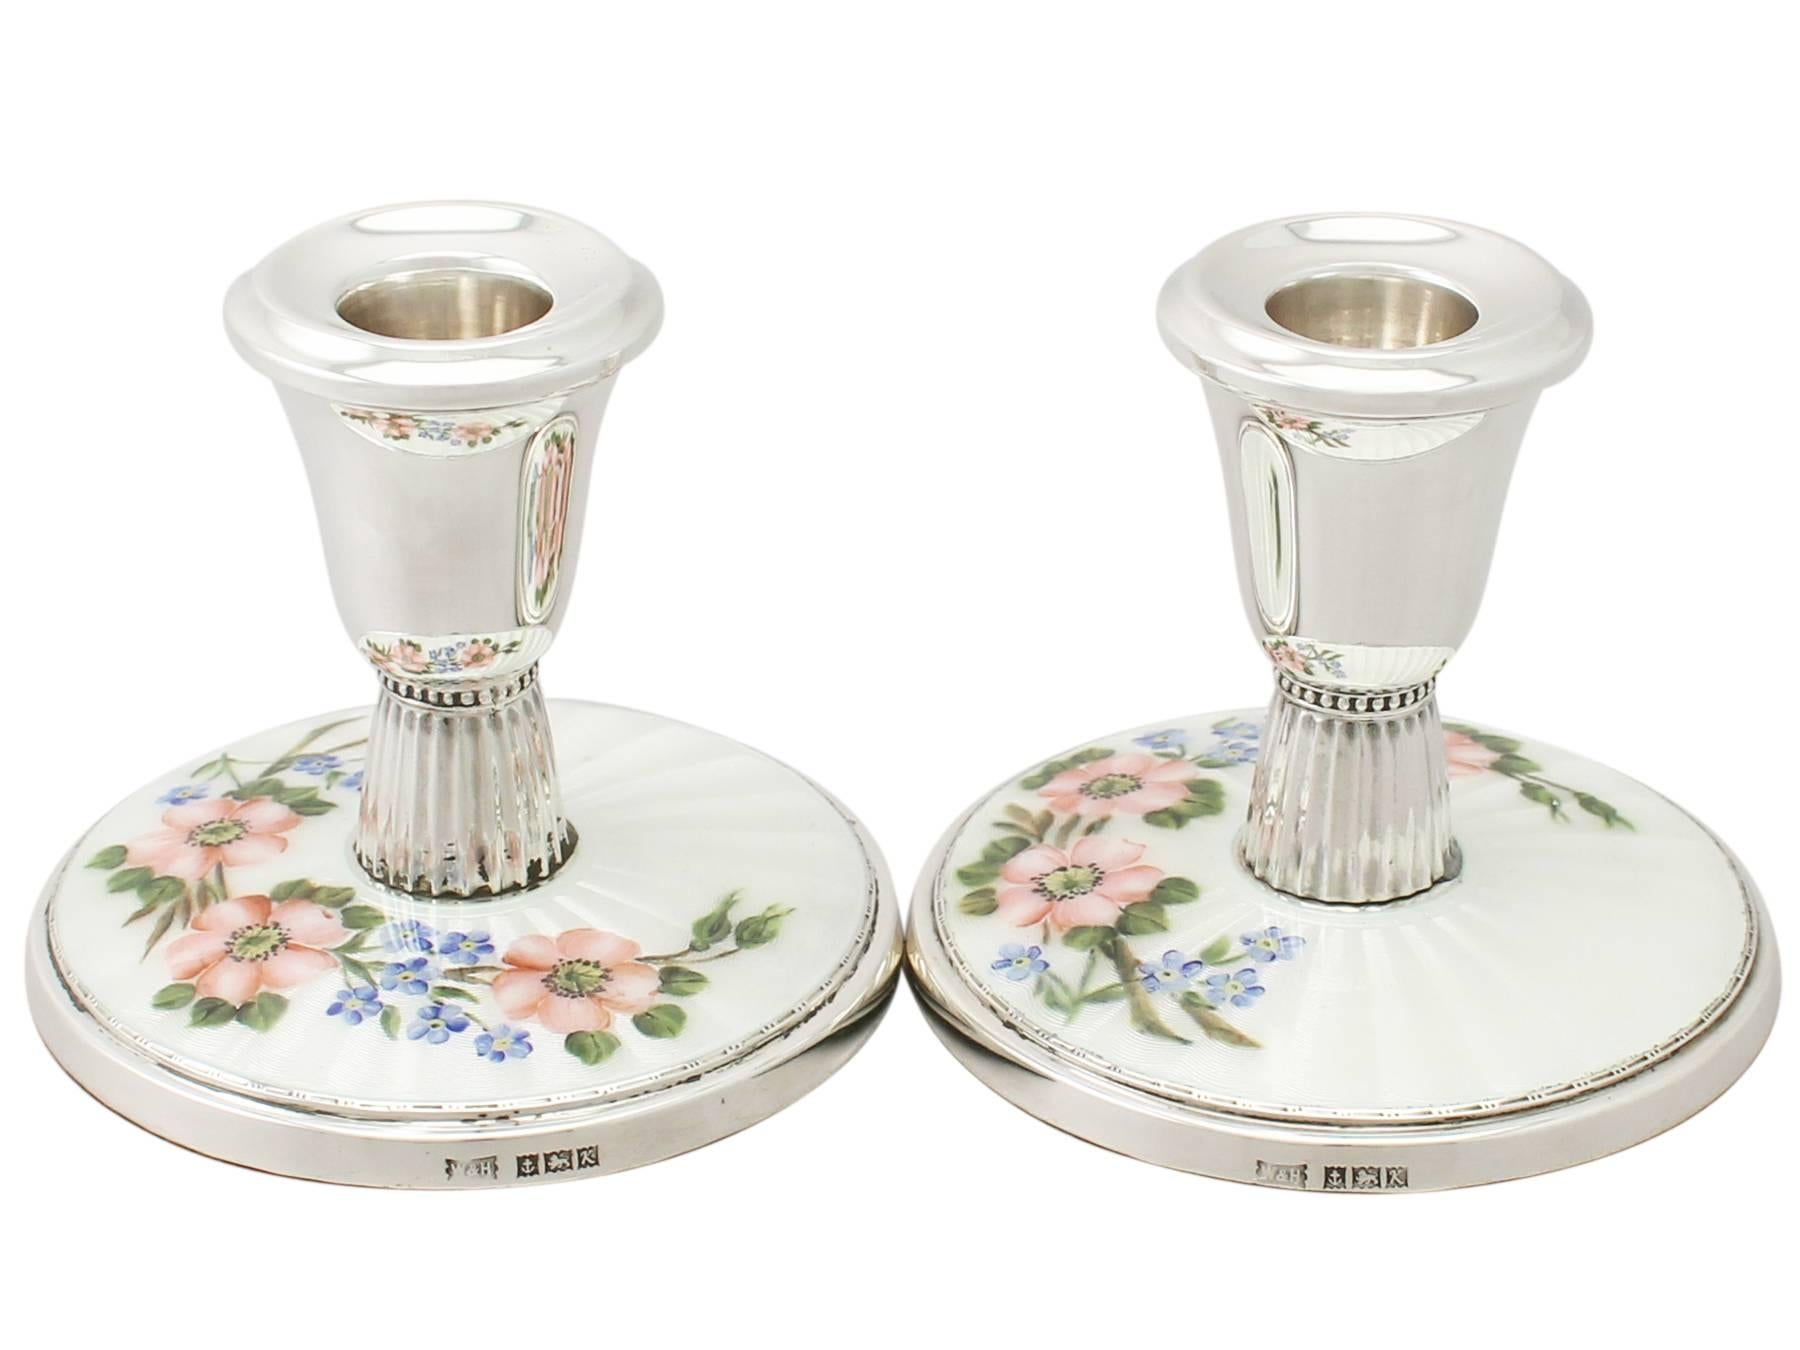 A fine and impressive pair of vintage Elizabeth II English sterling silver and guilloche enamel bedroom/piano candlesticks; an addition to our ornamental silverware collection

These fine vintage Elizabeth II English sterling silver and enamel